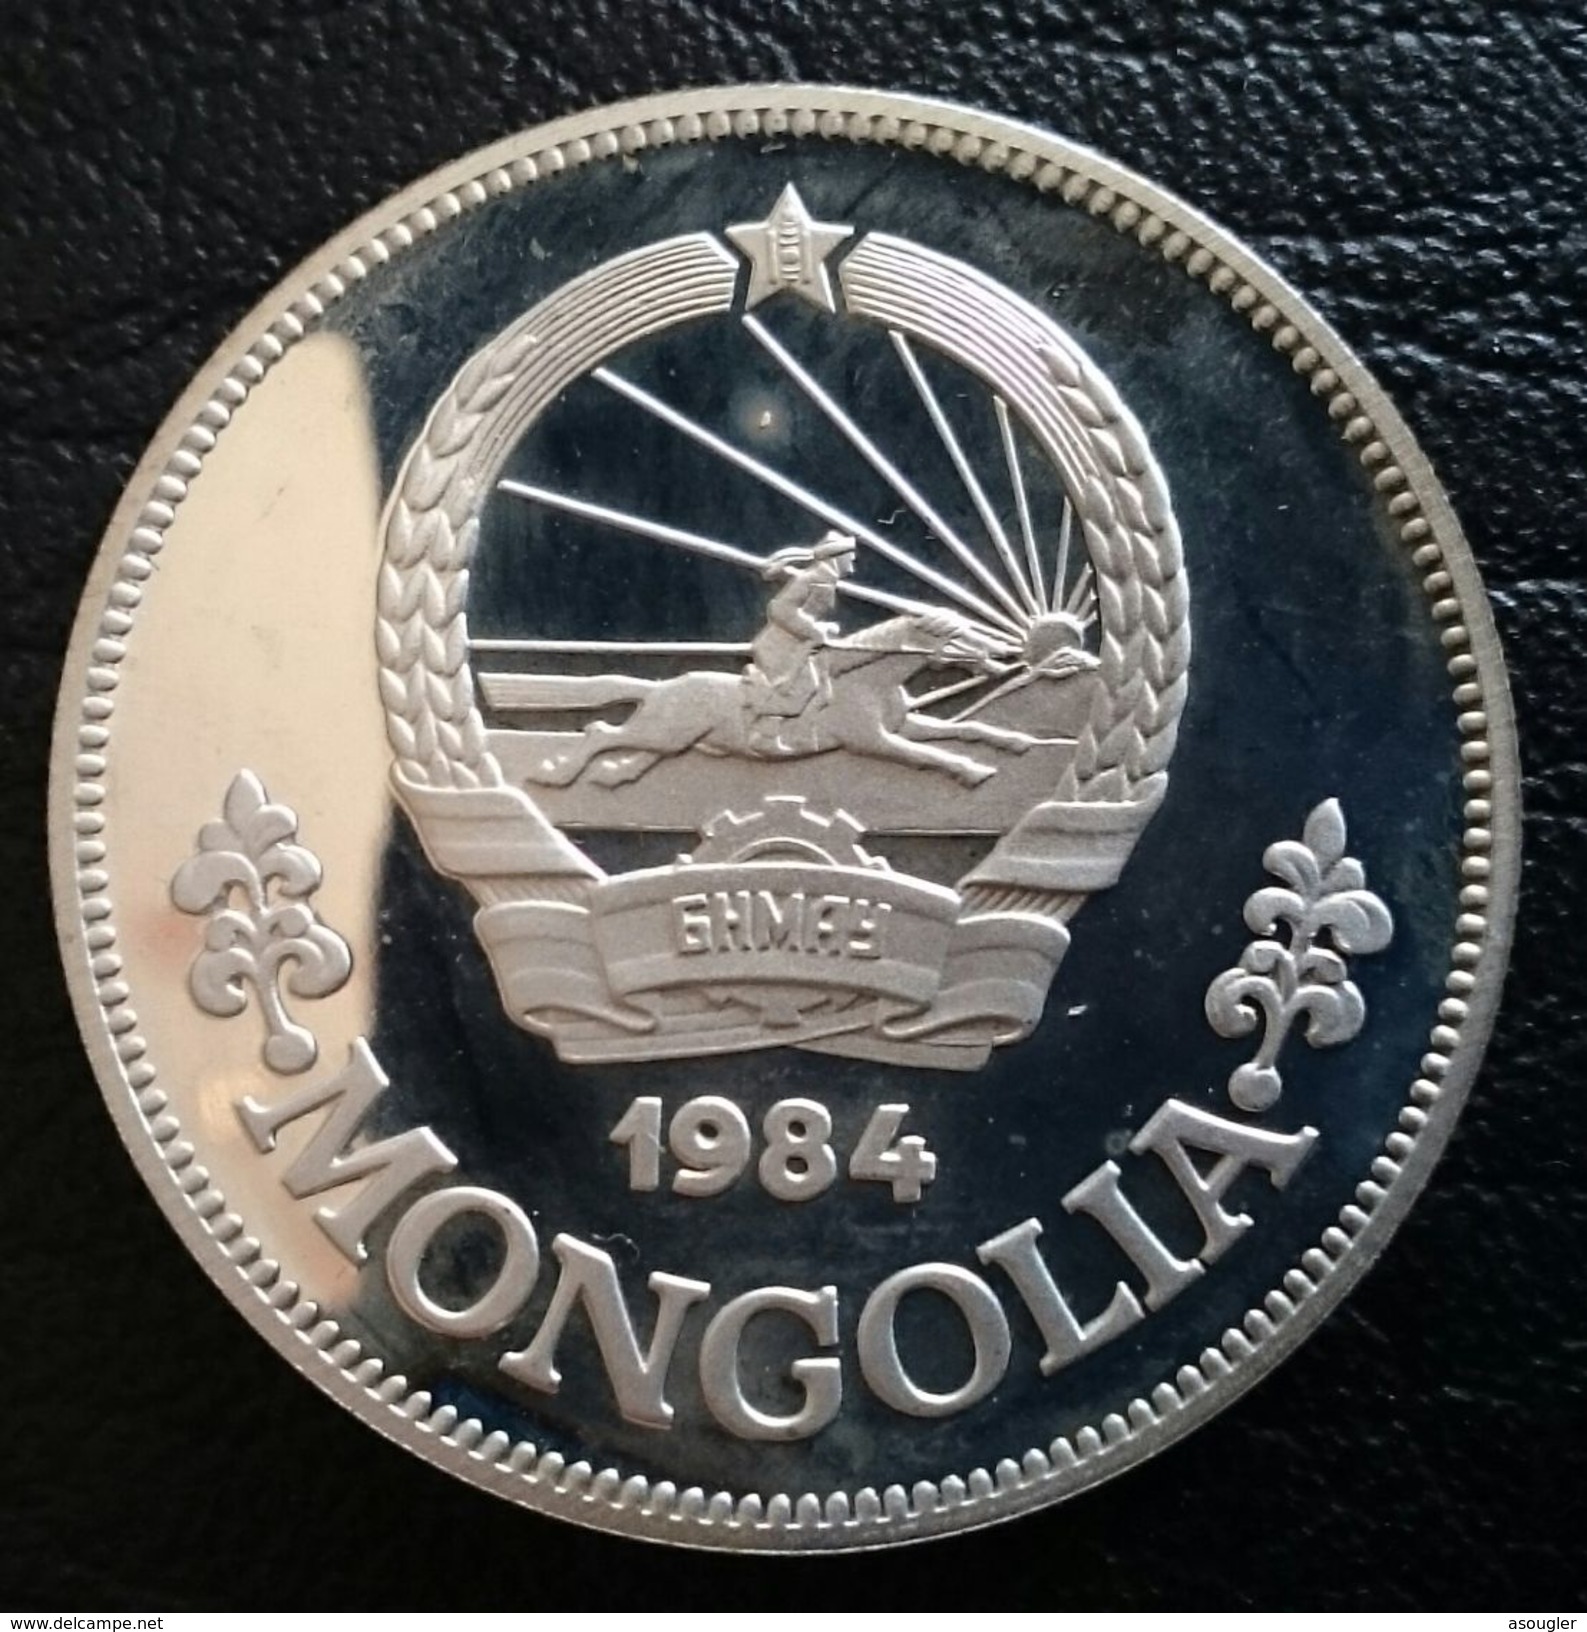 MONGOLIA 25 TUGRIK 1984 SILVER PROOF "Decade For Women" Free Shipping Via Registered Air Mail - Mongolie